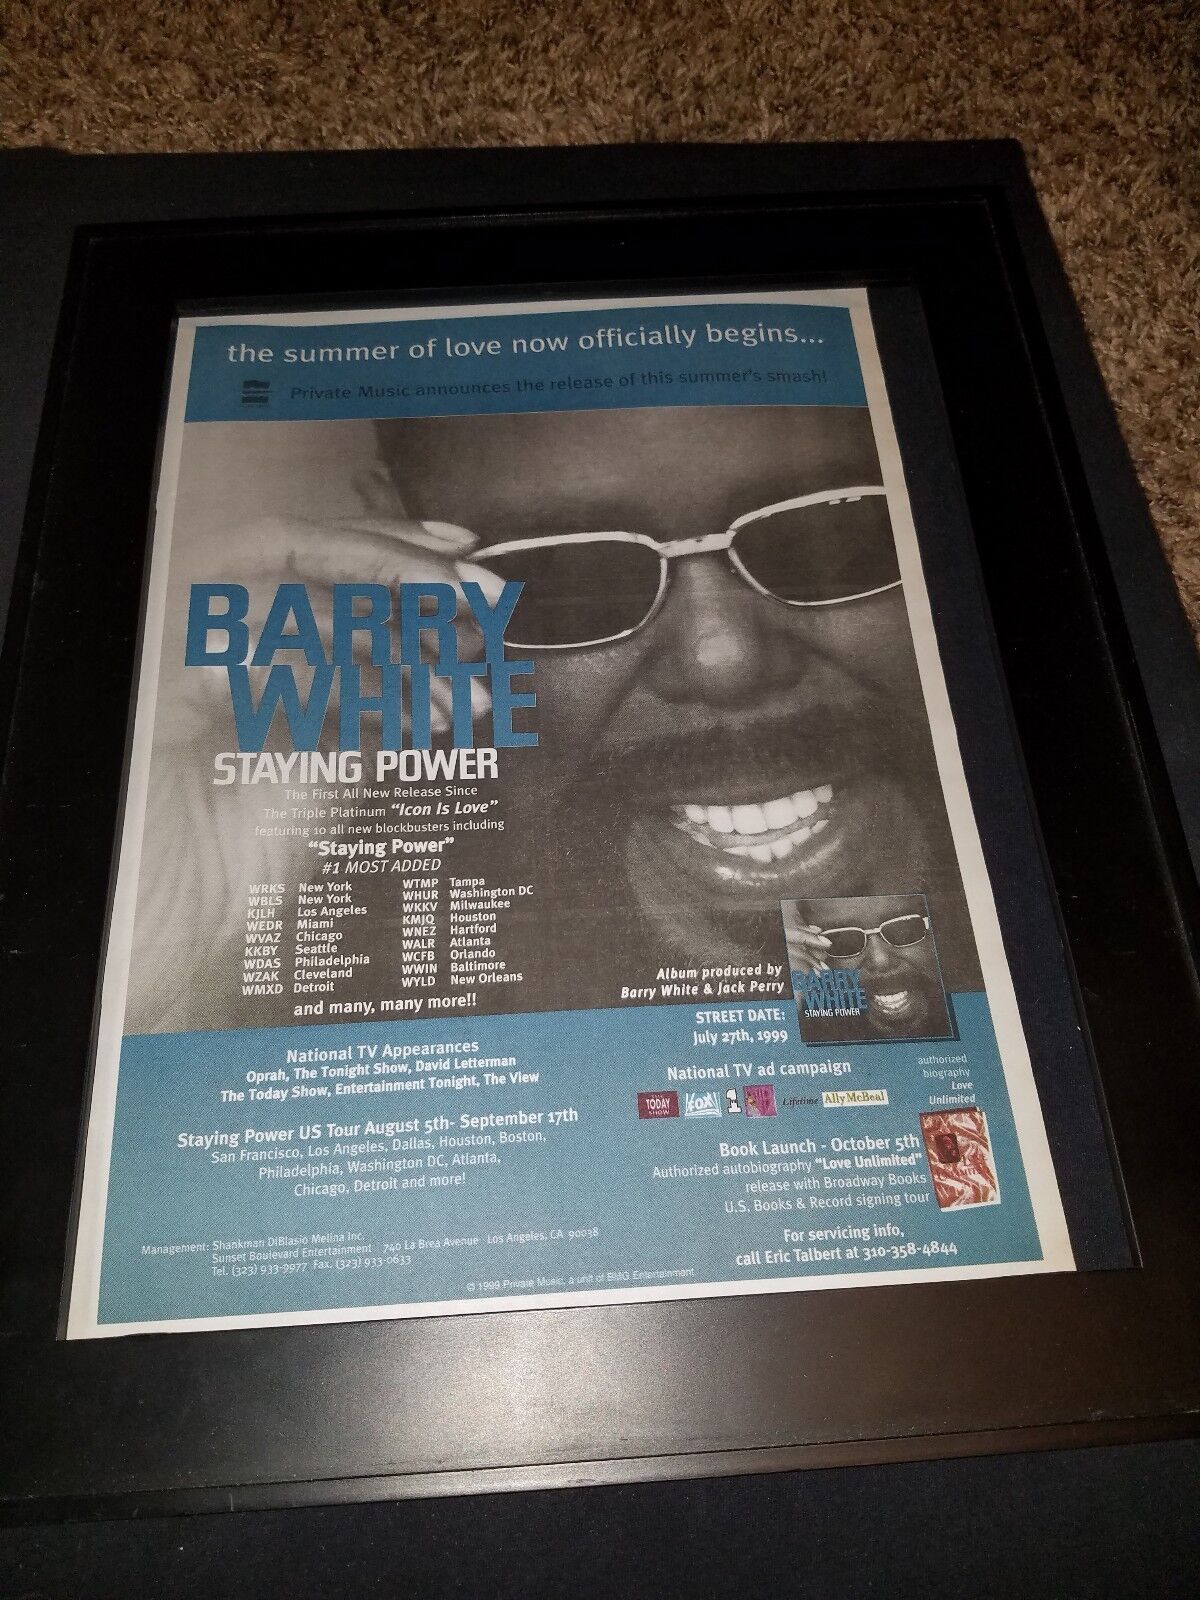 Barry White Staying Power Rare Original Radio Promo Poster Ad Framed!